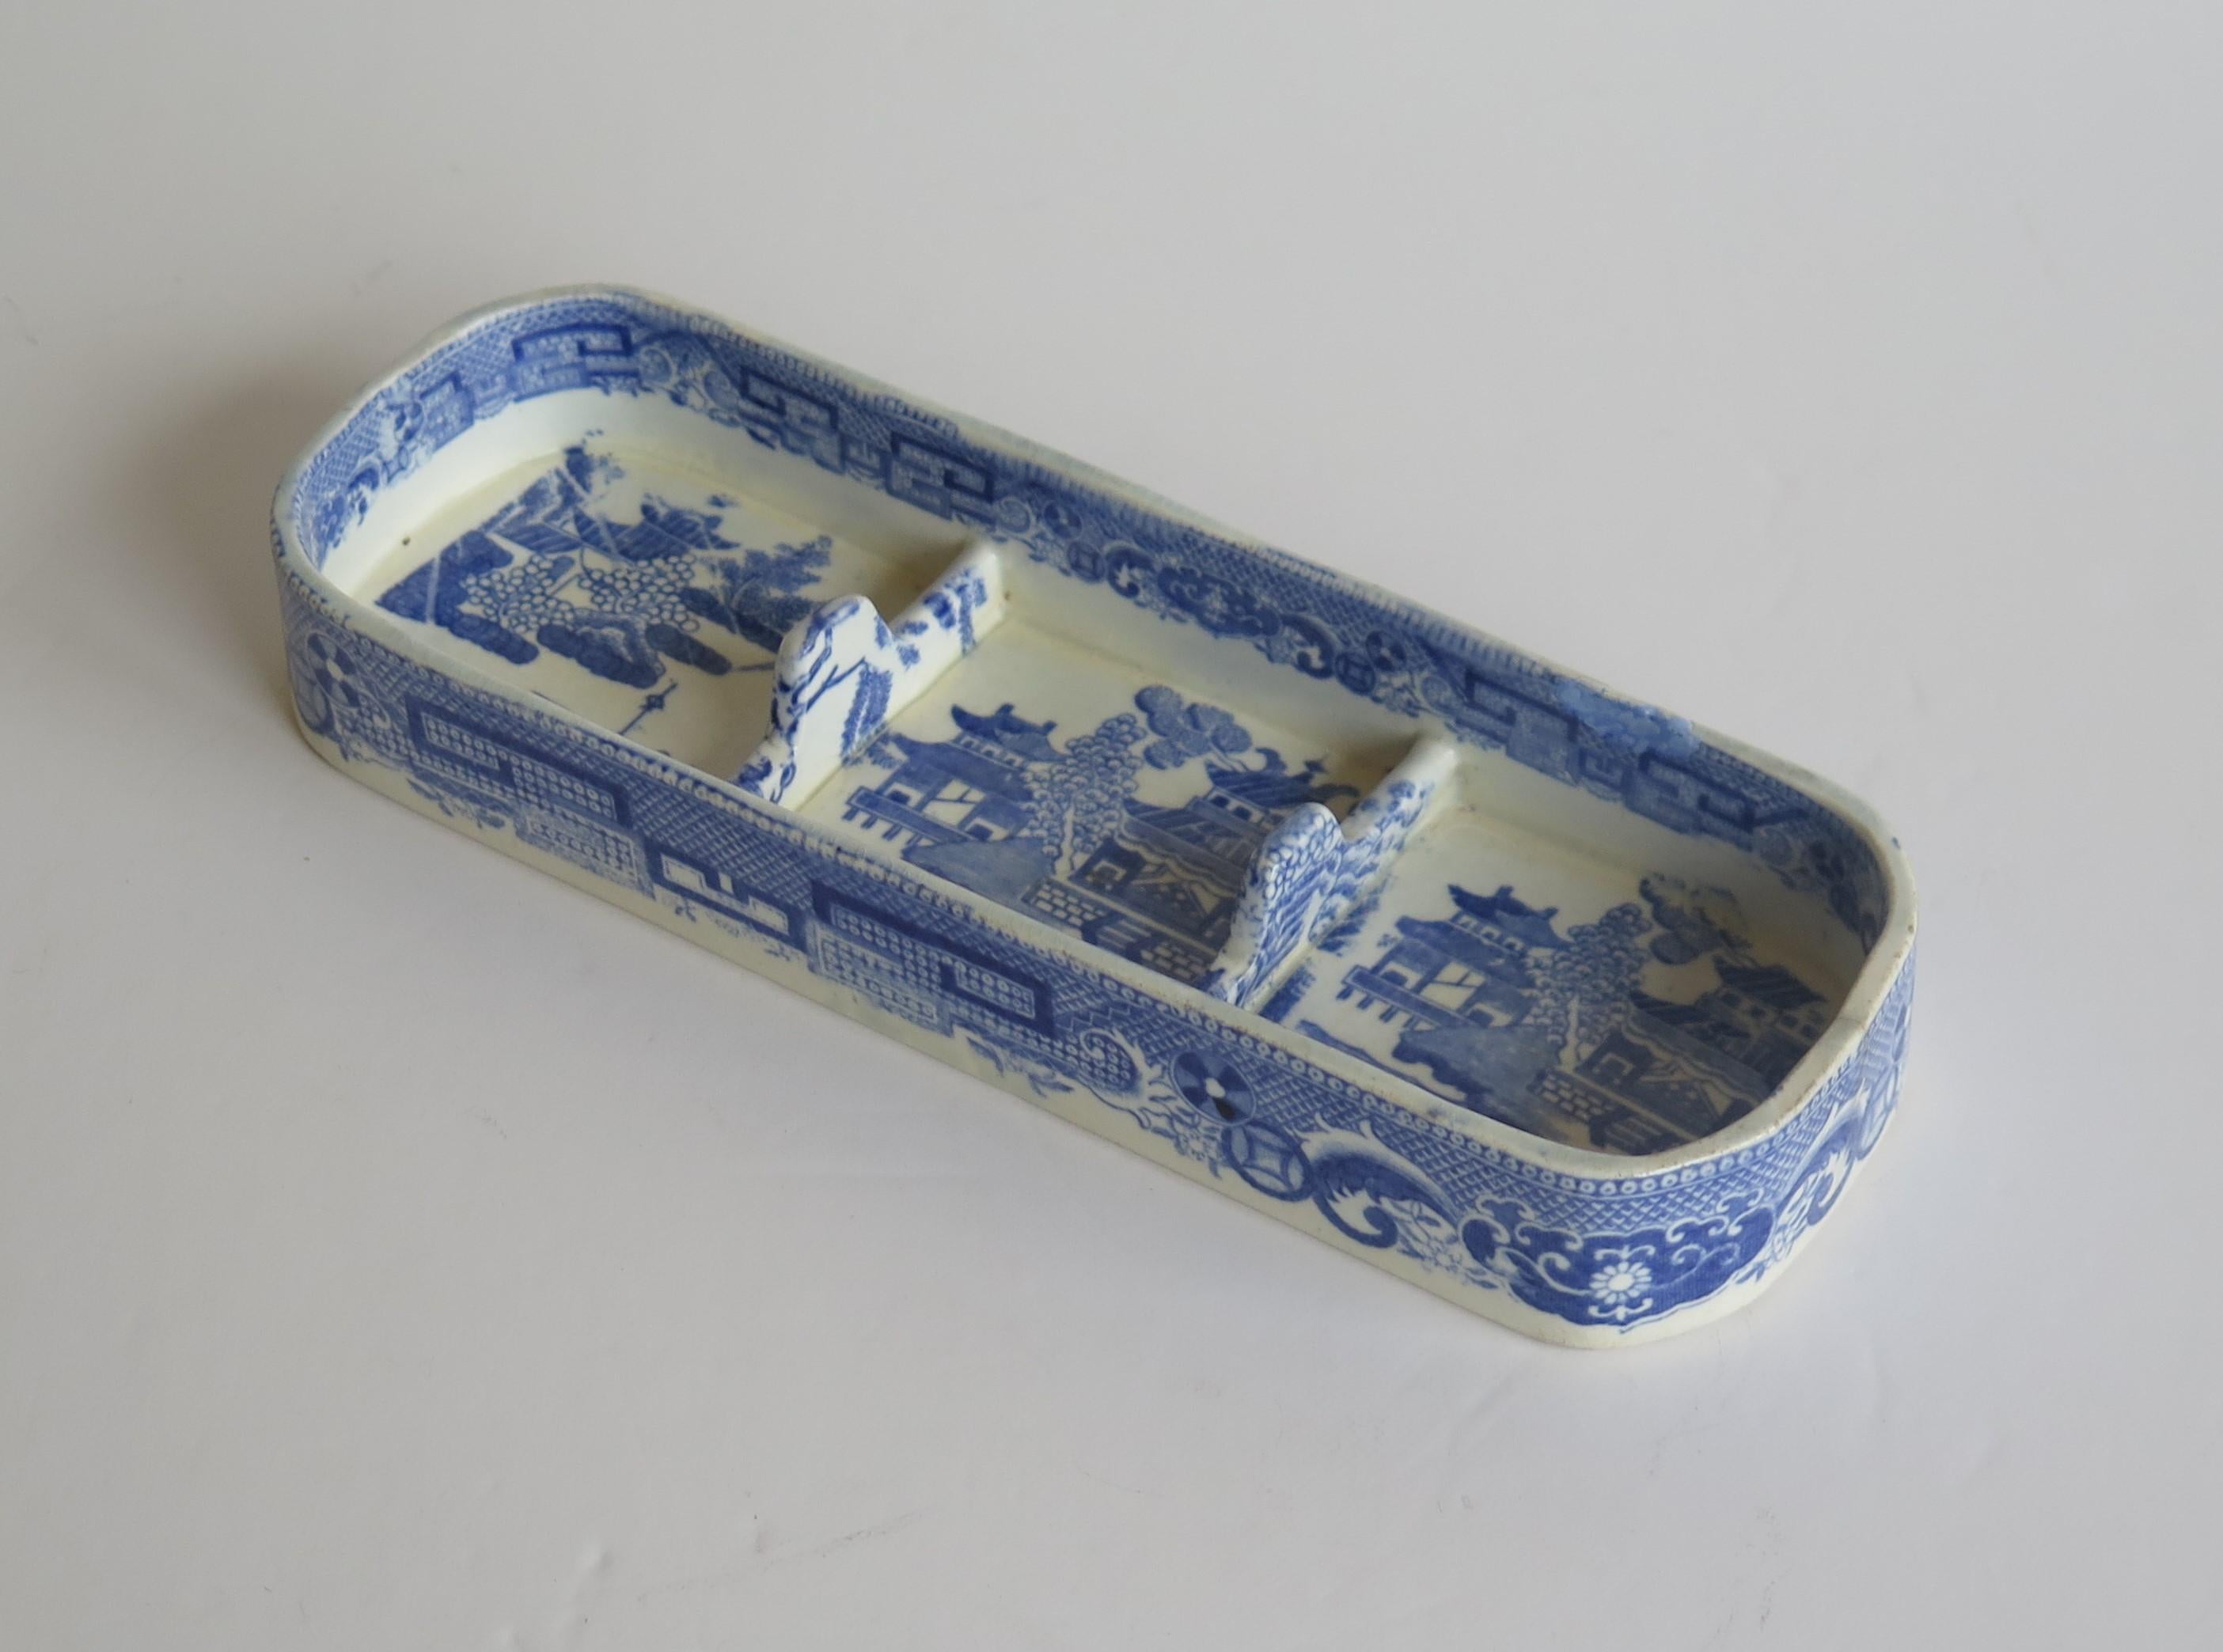 Glazed Rare Early Spode Pen Tray Pearlware Blue and White Willow Pattern, circa 1800